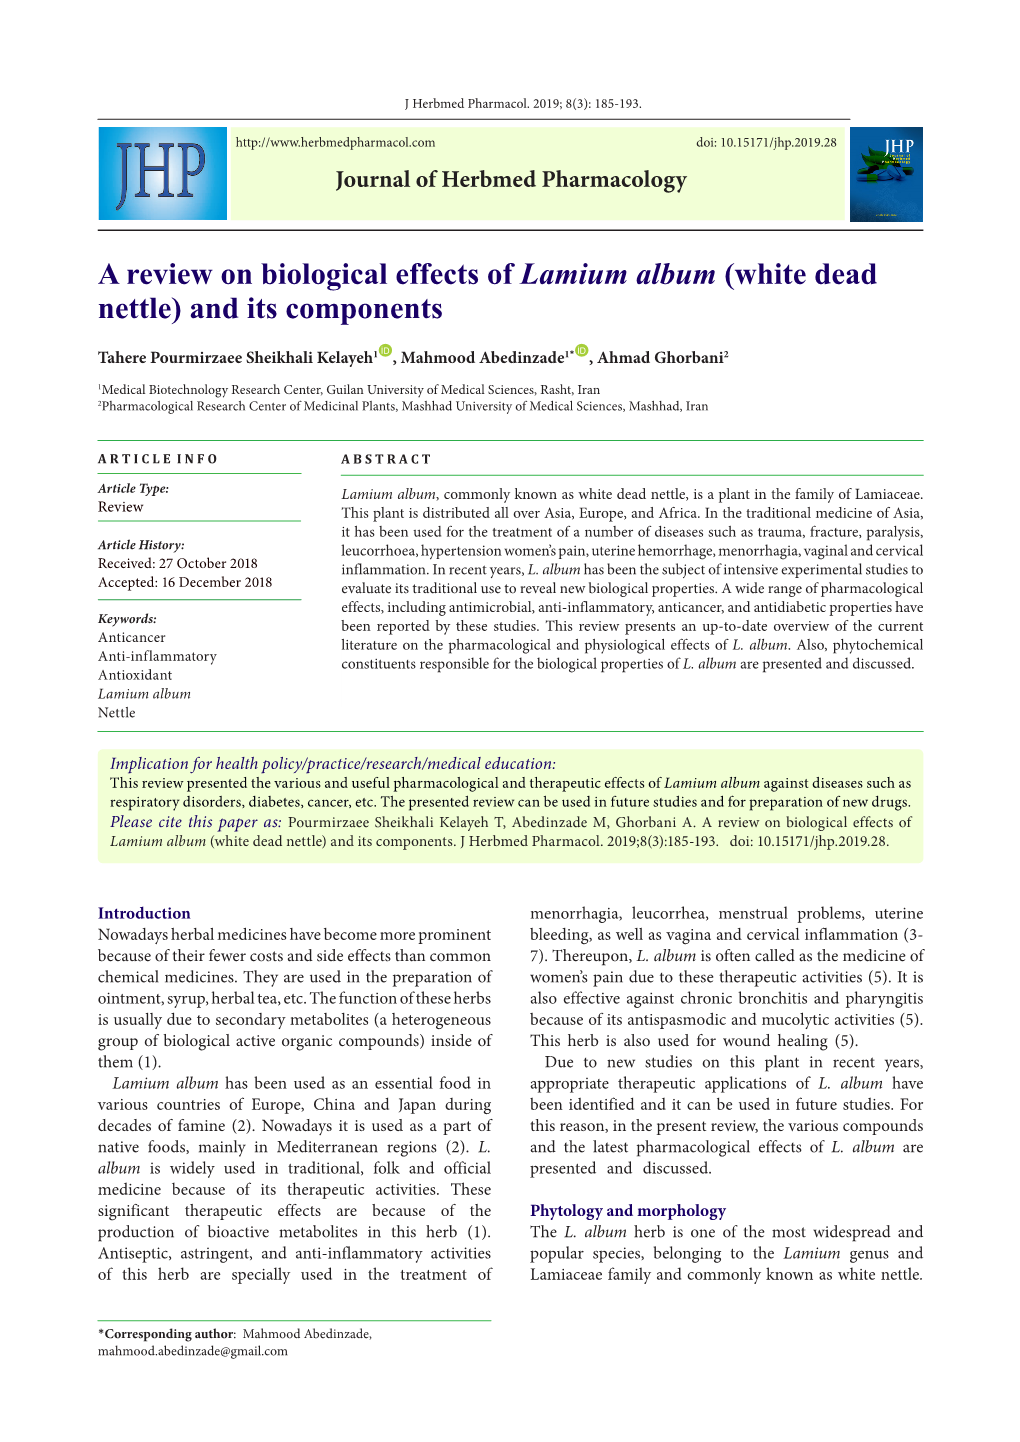 A Review on Biological Effects of Lamium Album (White Dead Nettle) and Its Components